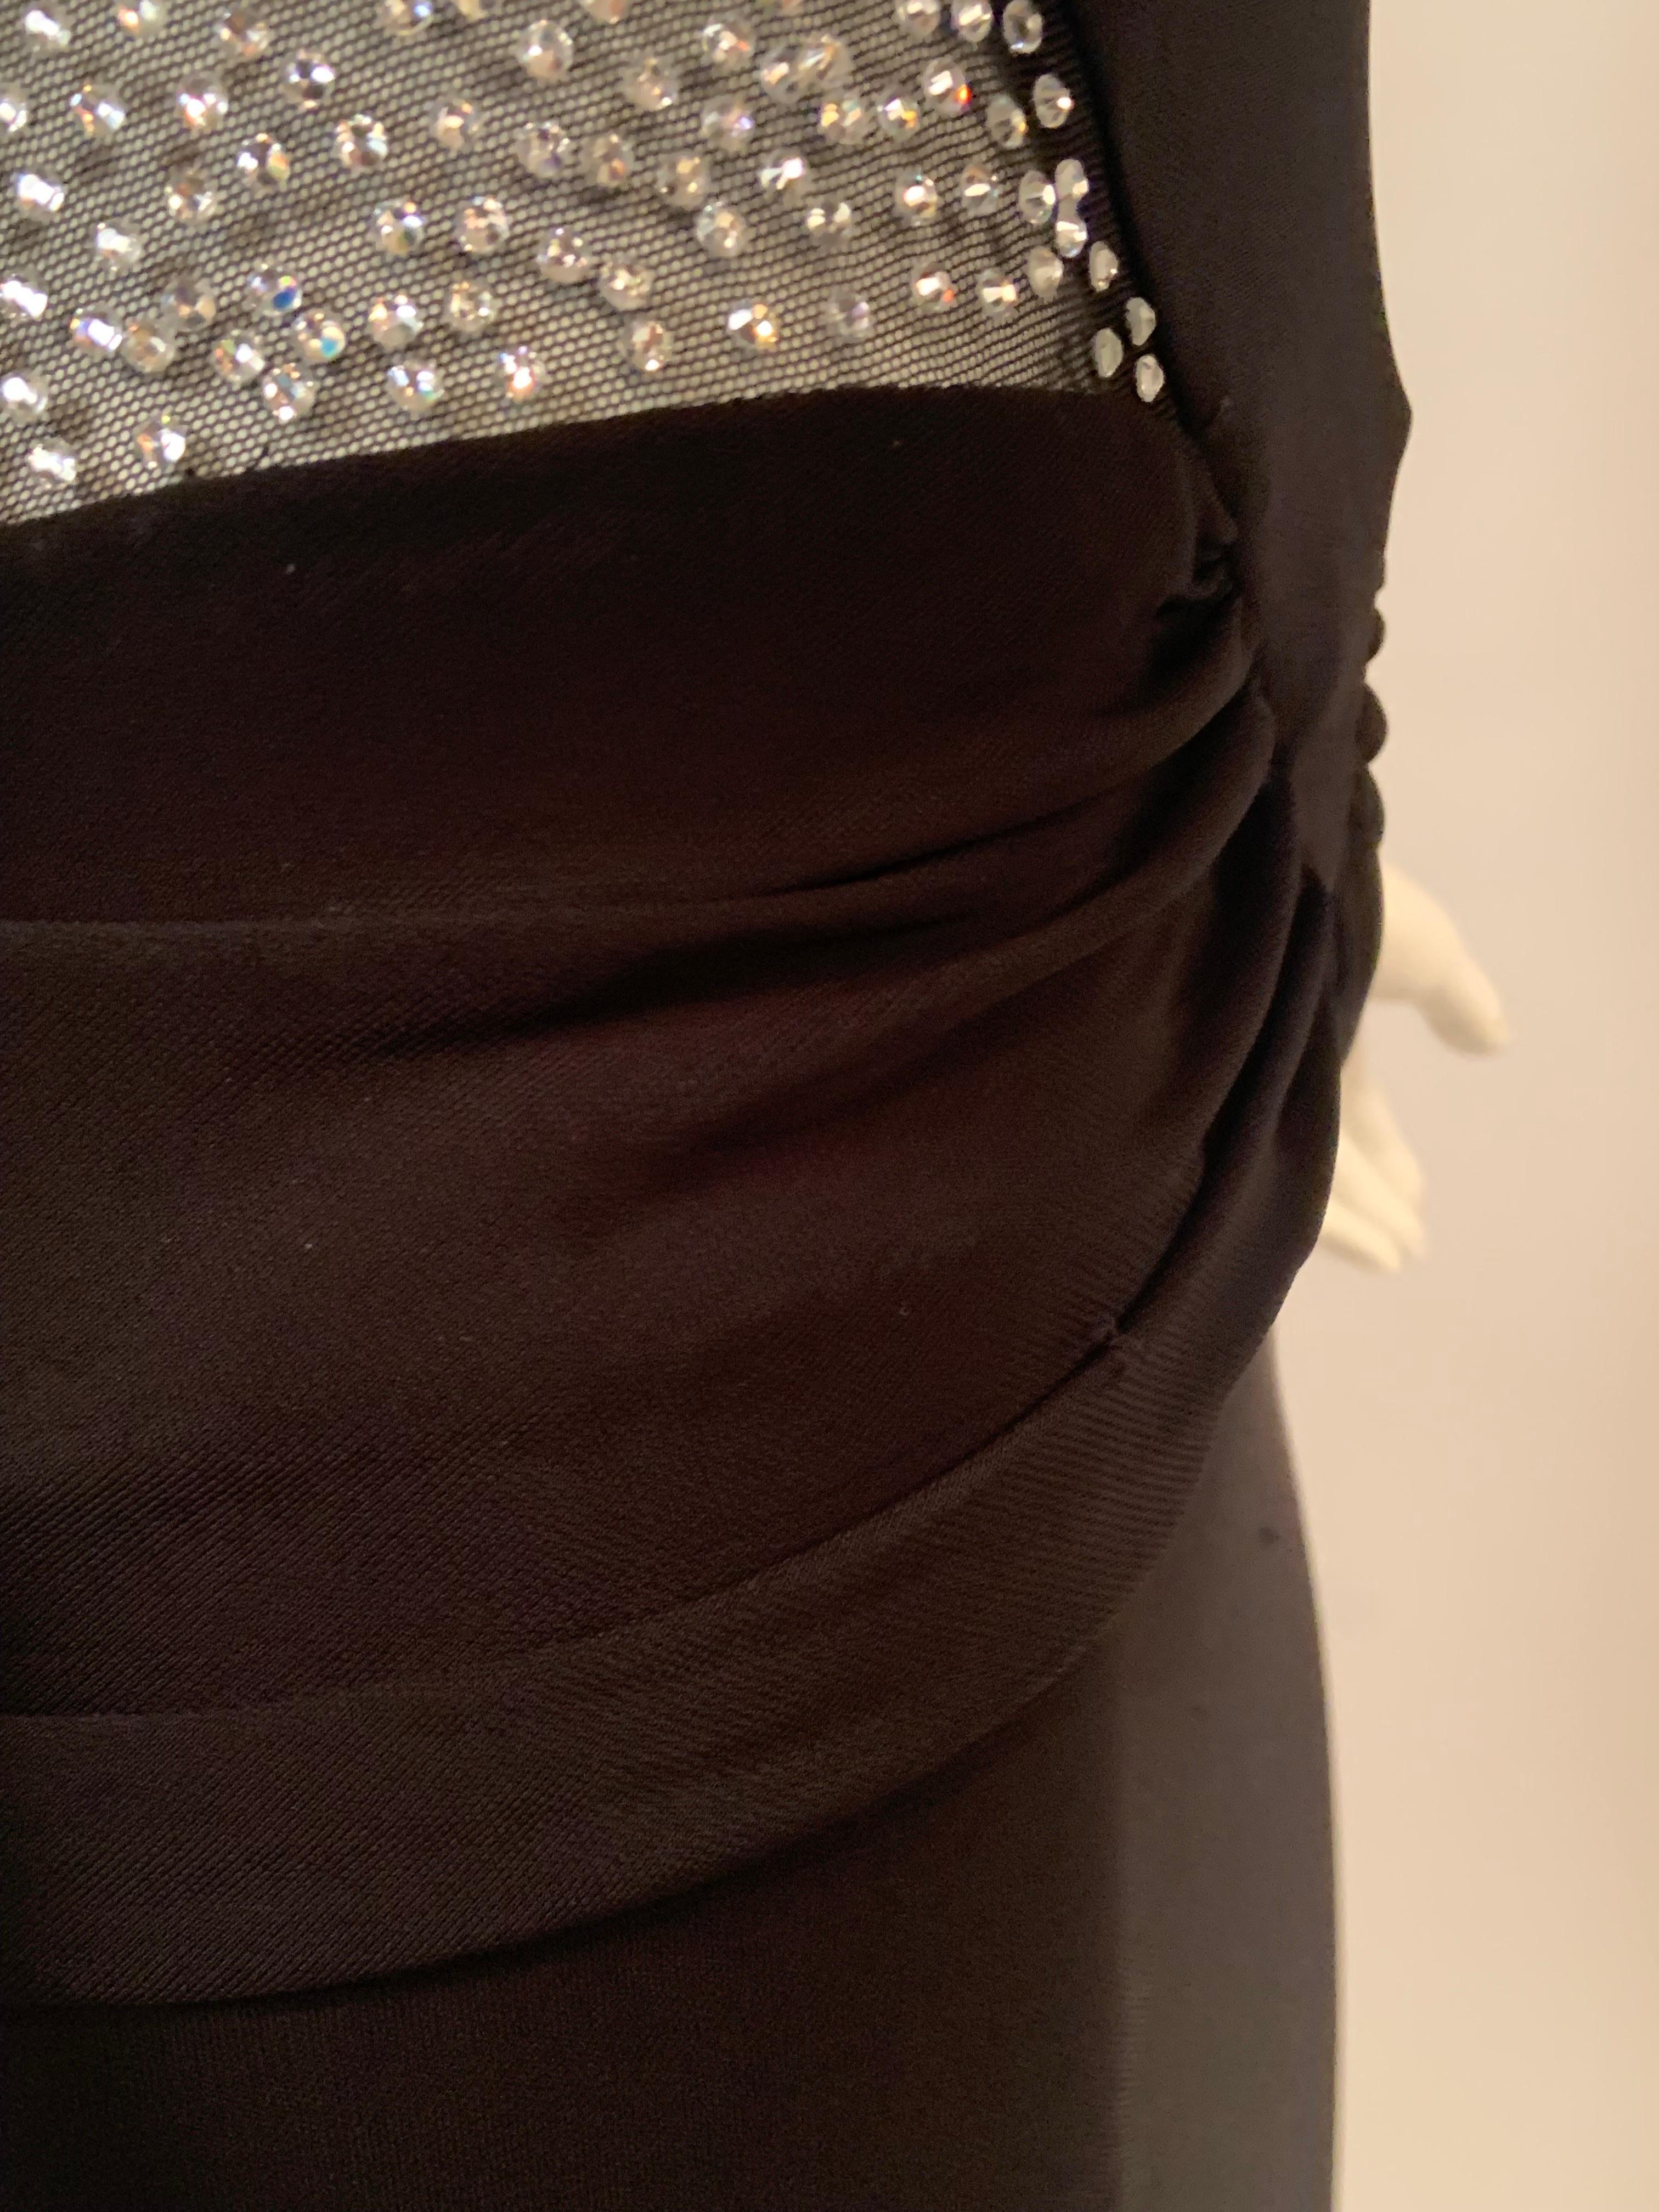 Sexy Black Gown with Rhinestone Studded Sheer Back and Sides For Sale 10